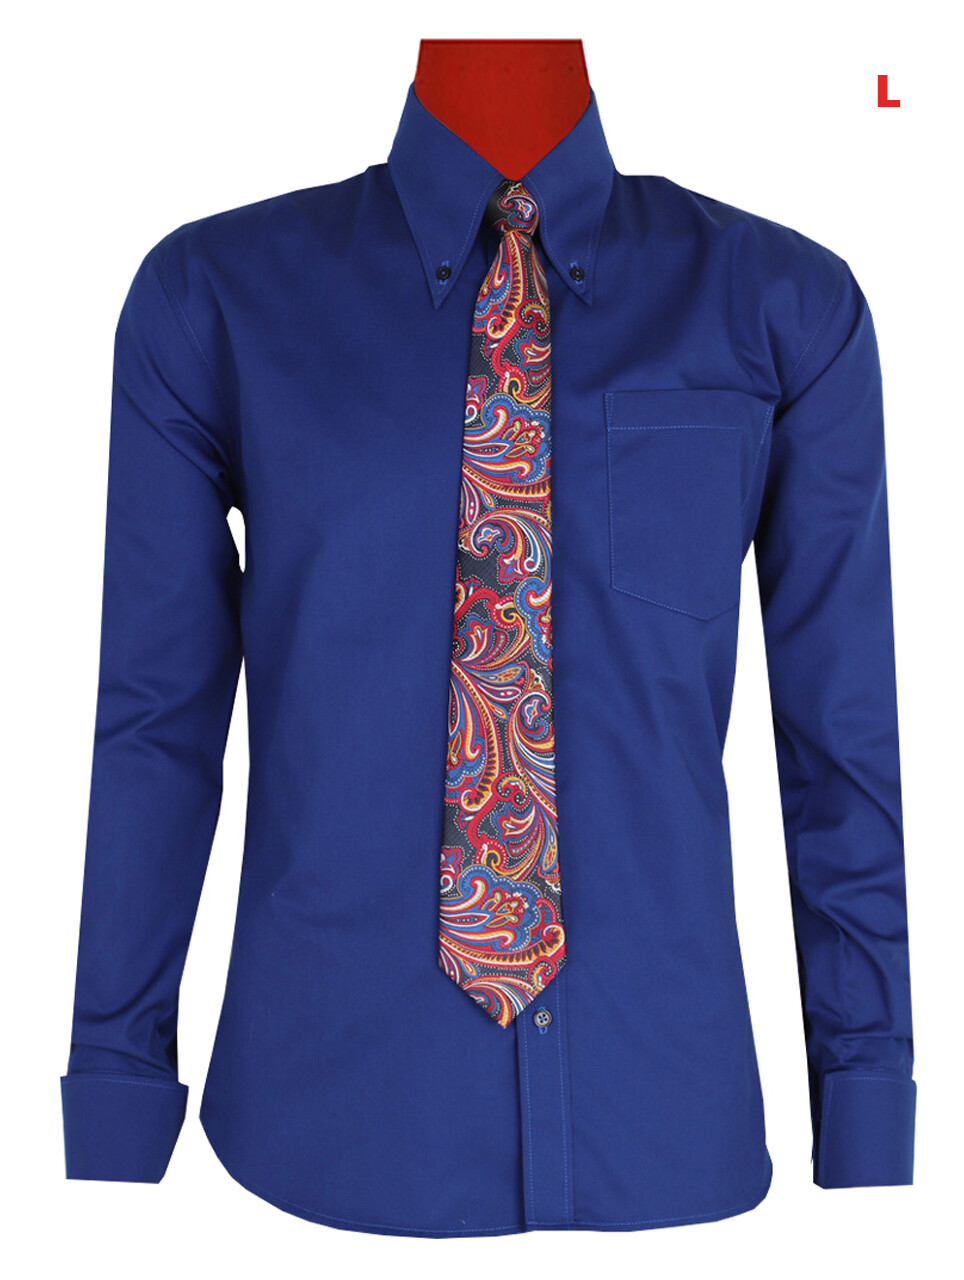 This Shirt Only. Button-Down Pointed Collar  Blue Color Shirt